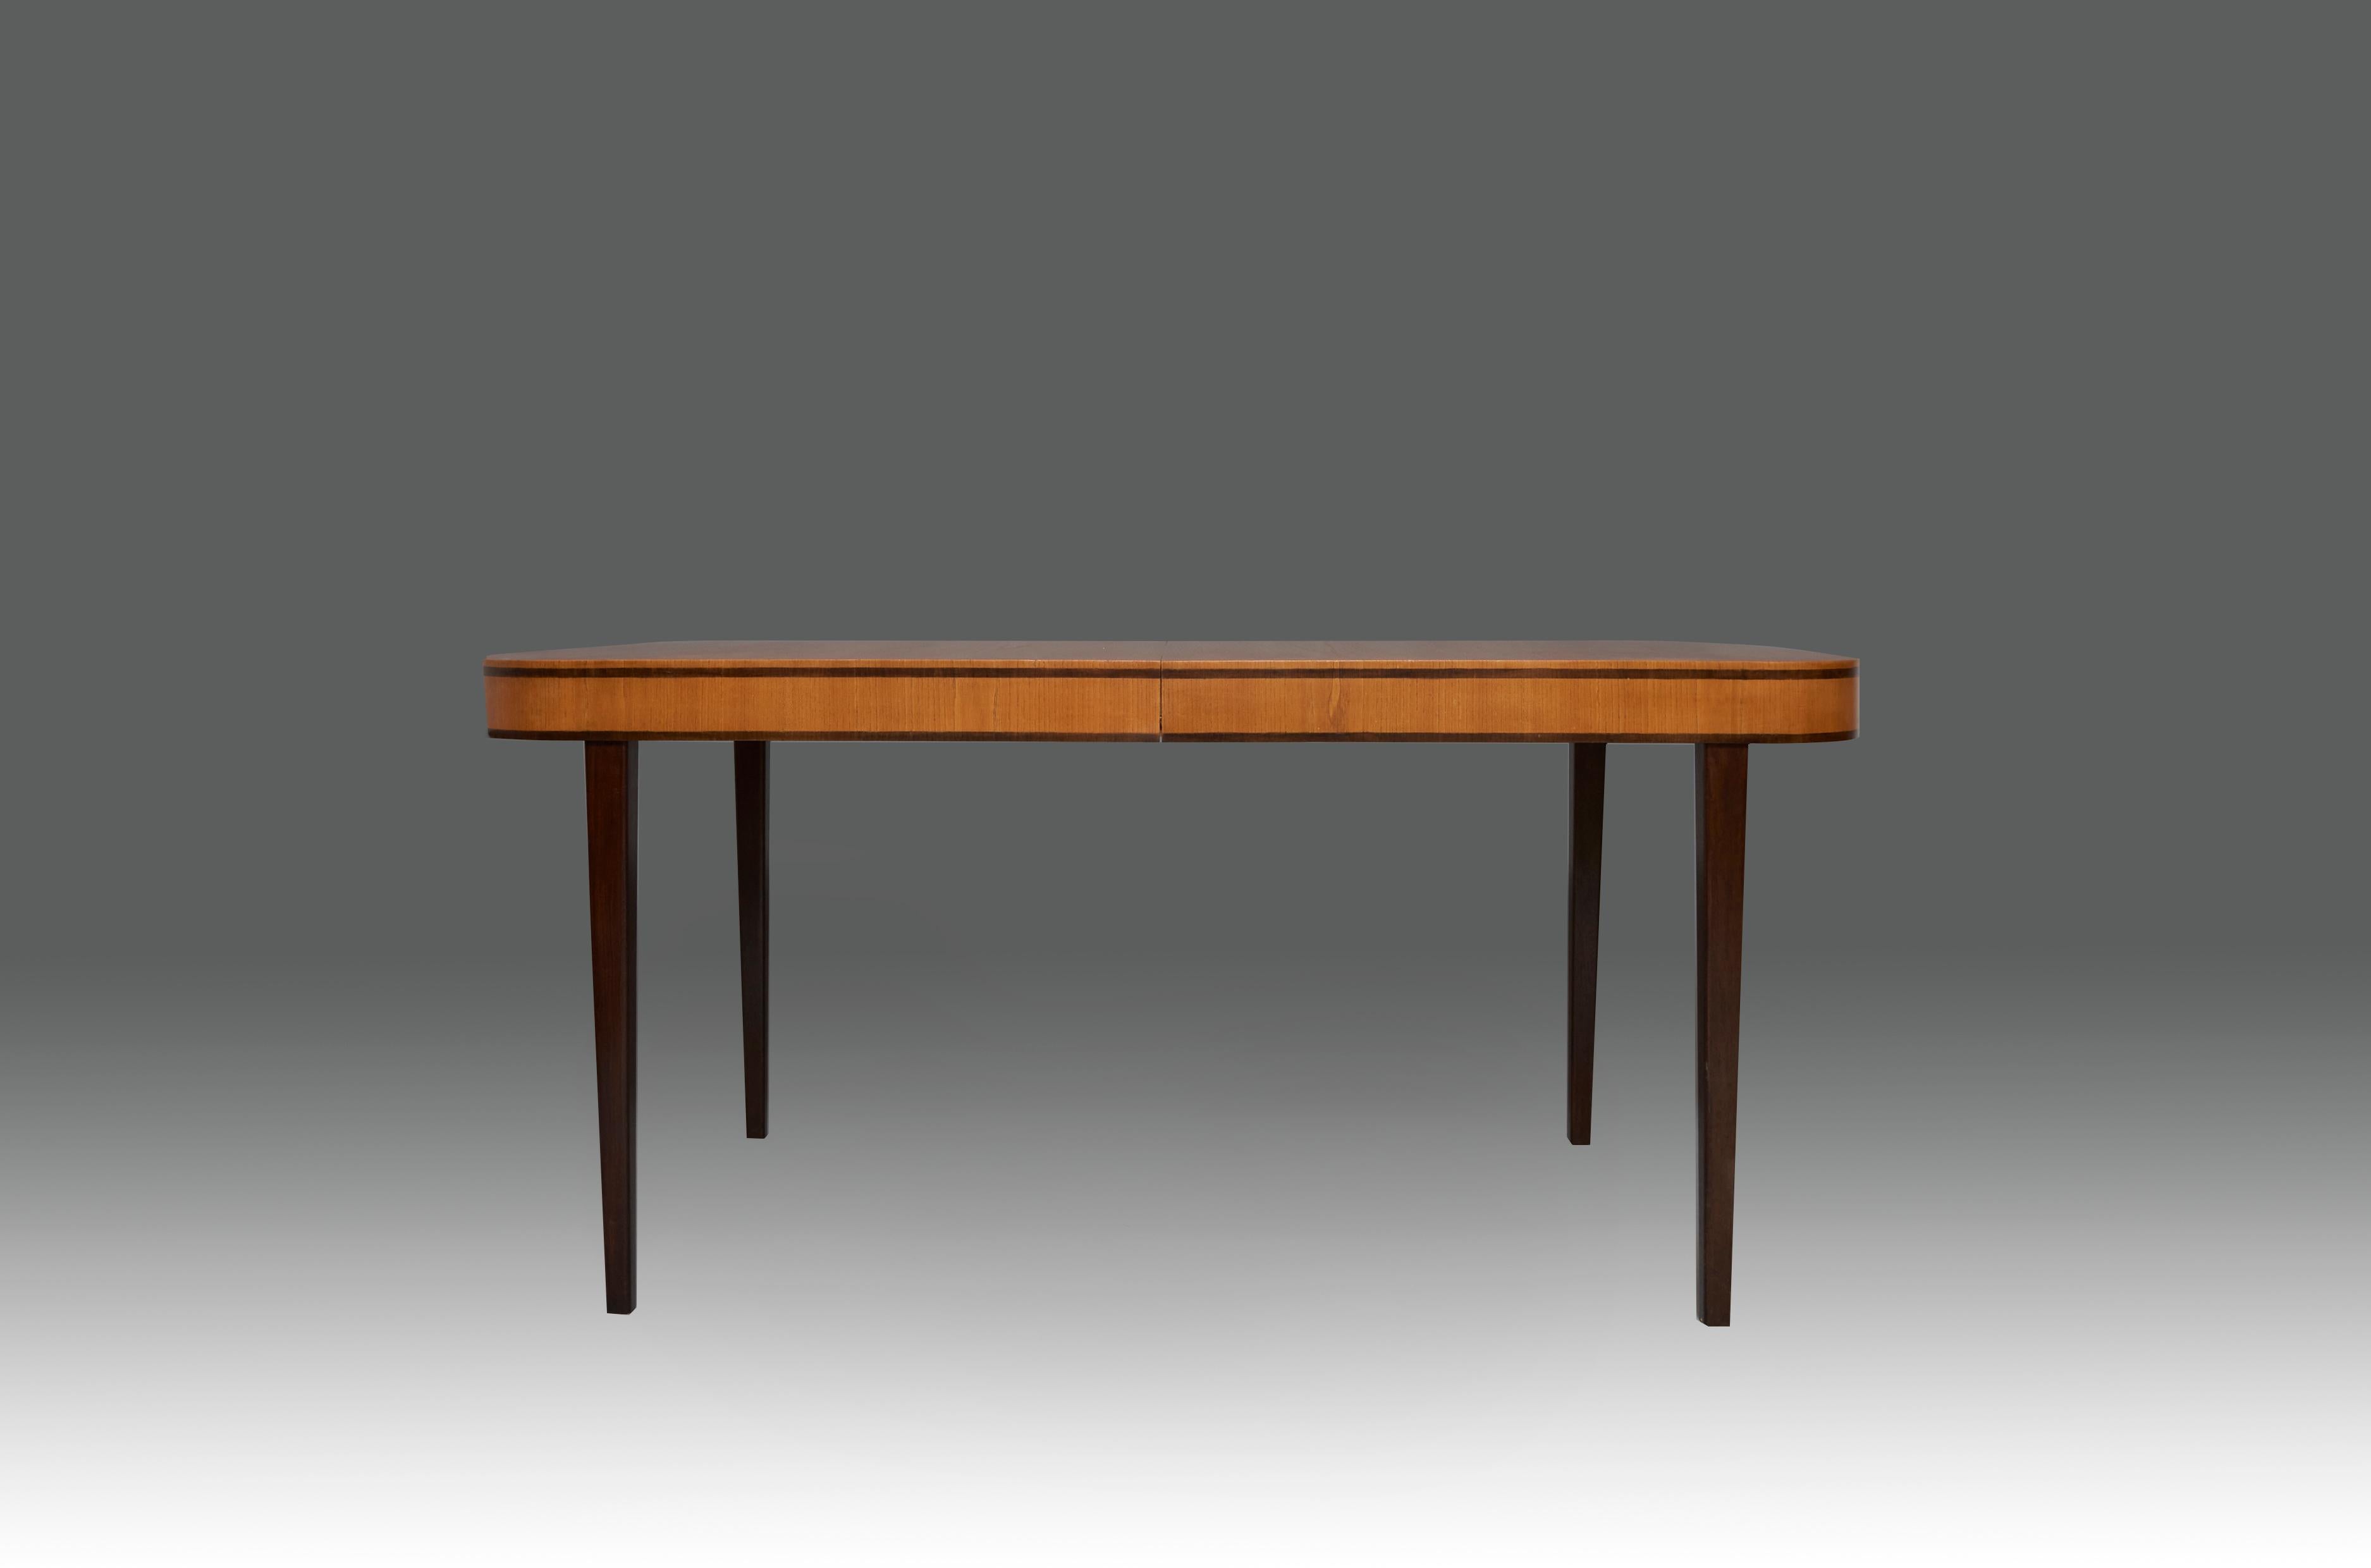 Extensible dining table designed by Axel Einar Hjorth in Elm wood and dyed Elm wood details, with two birch extensions. Produced in 1938 by Nordiska Kompaniet, tagged NK R 40001 - C8 9 38. Sweden, final 1930’s

Axel Einar Hjorth was a swedish